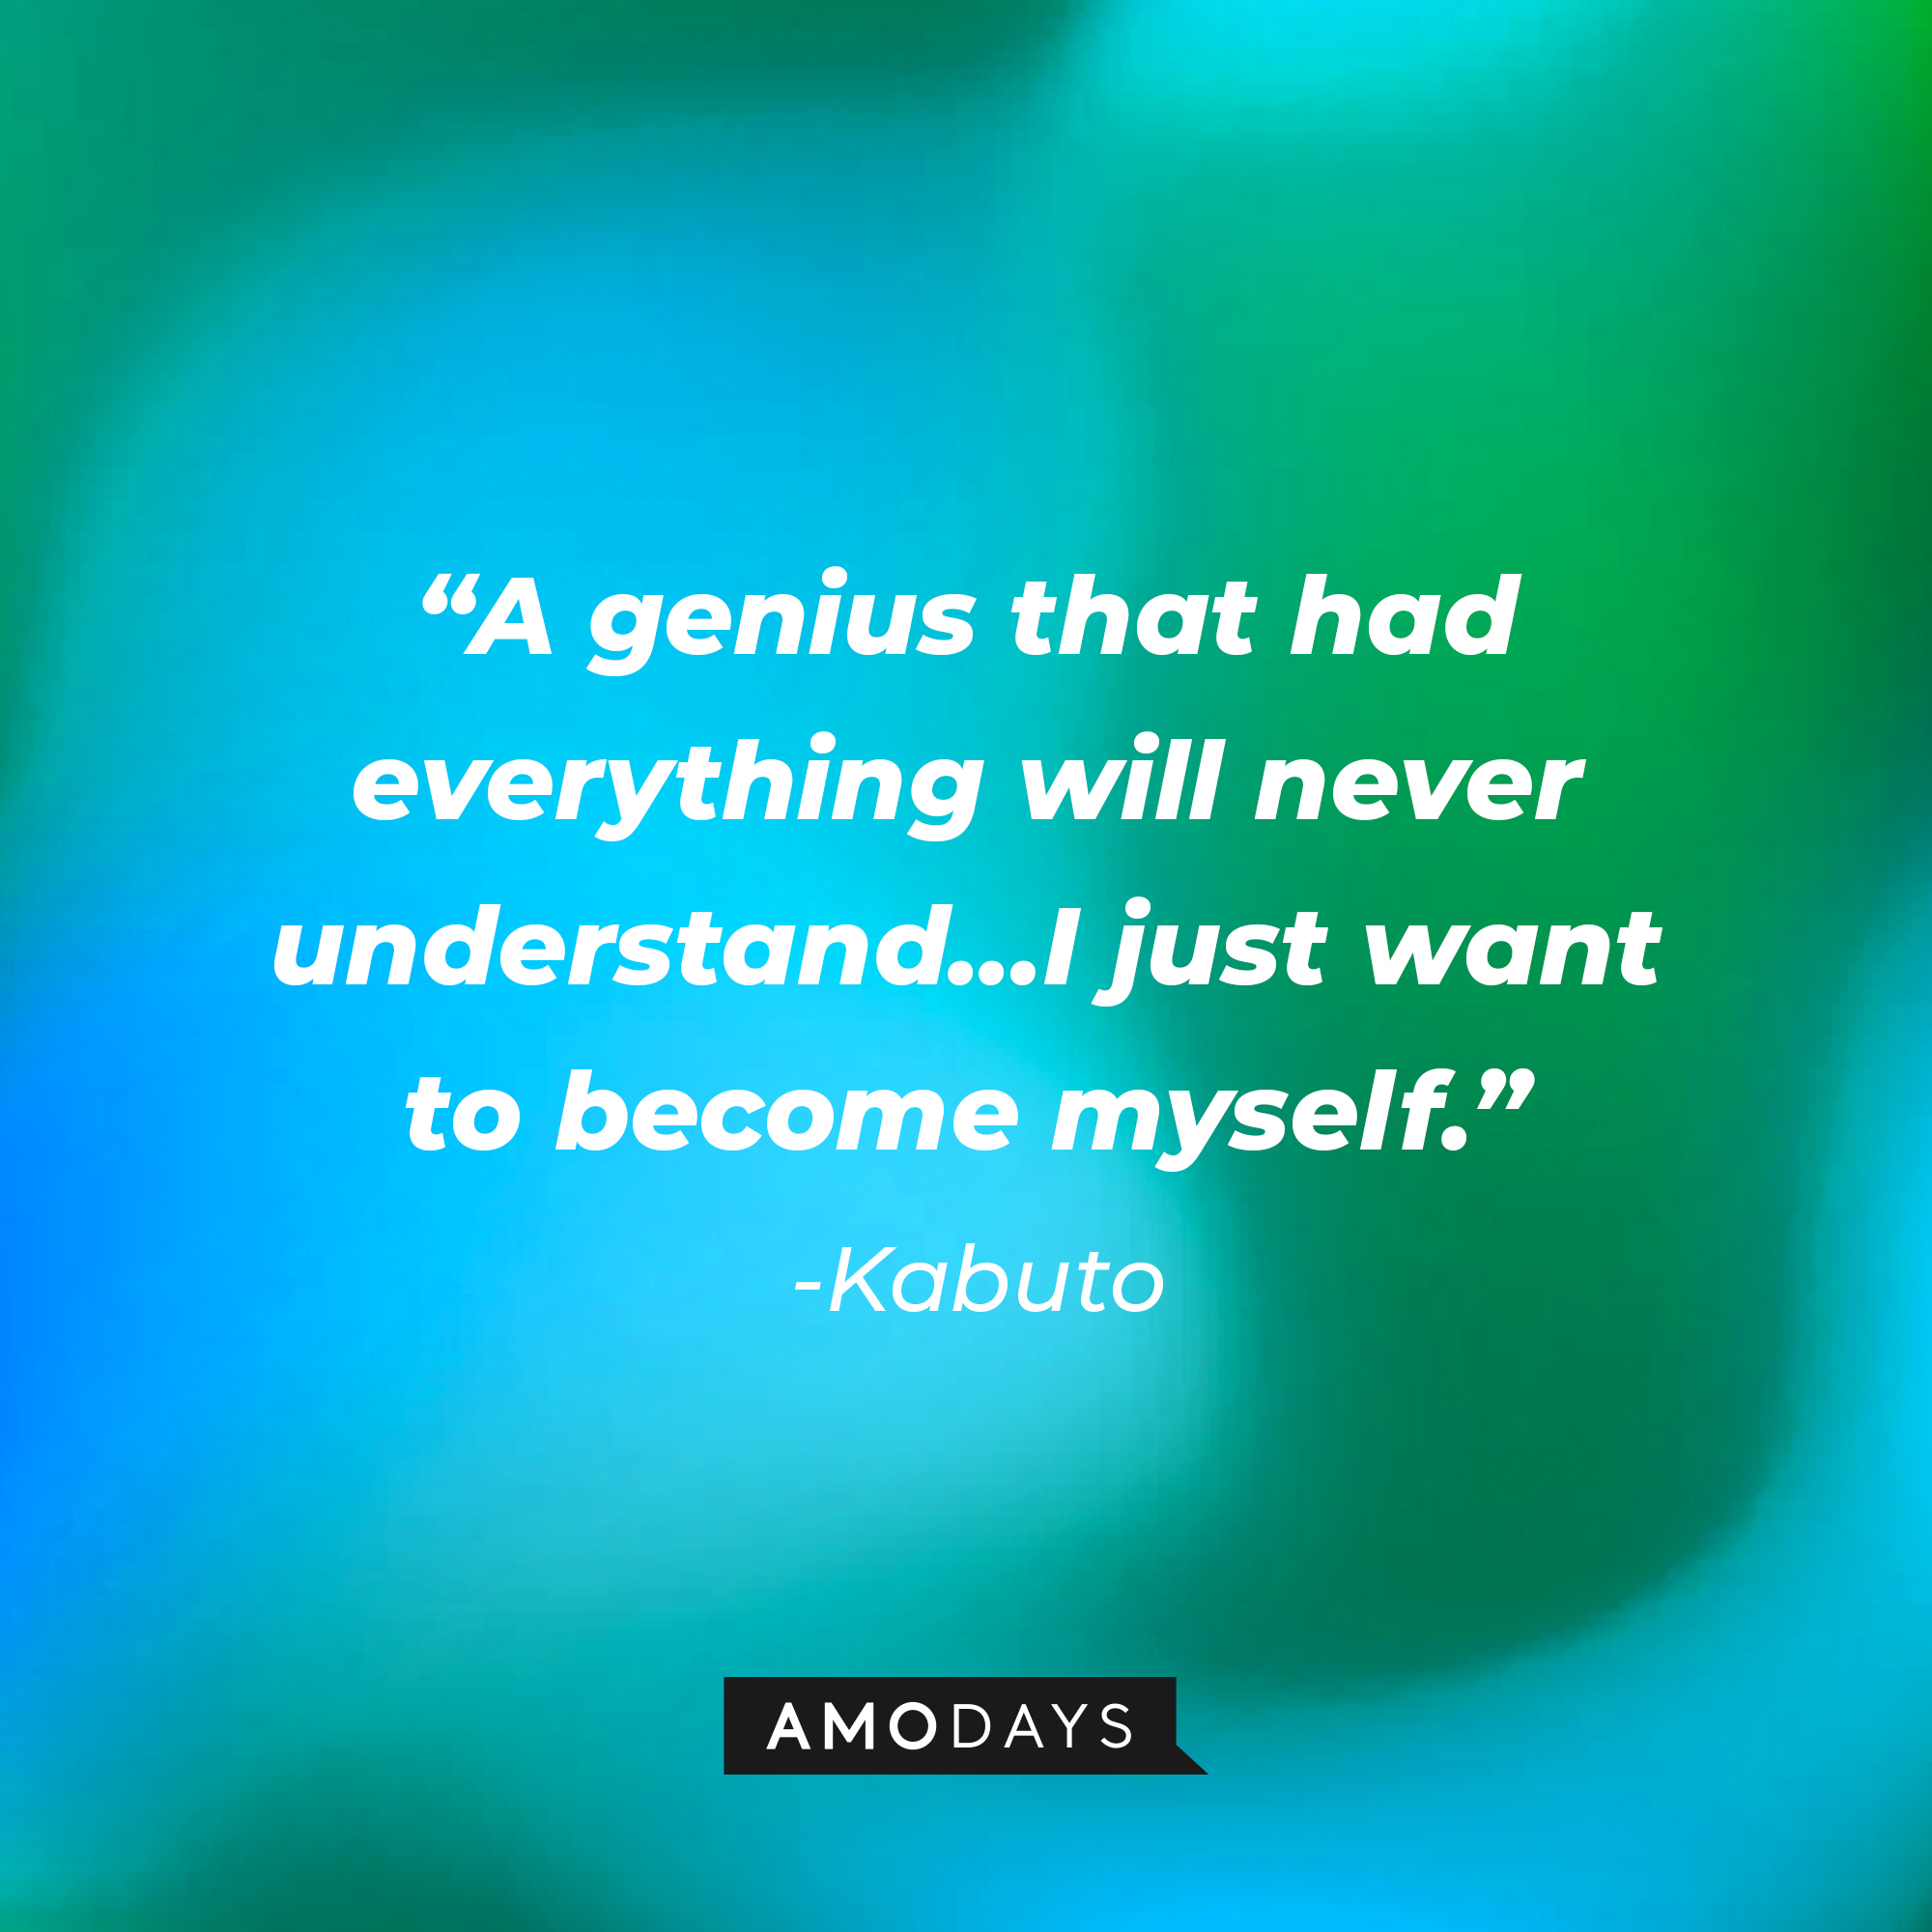 Kabuto’s quote: "A genius that had everything will never understand…I just want to become myself." | Source: AmoDays